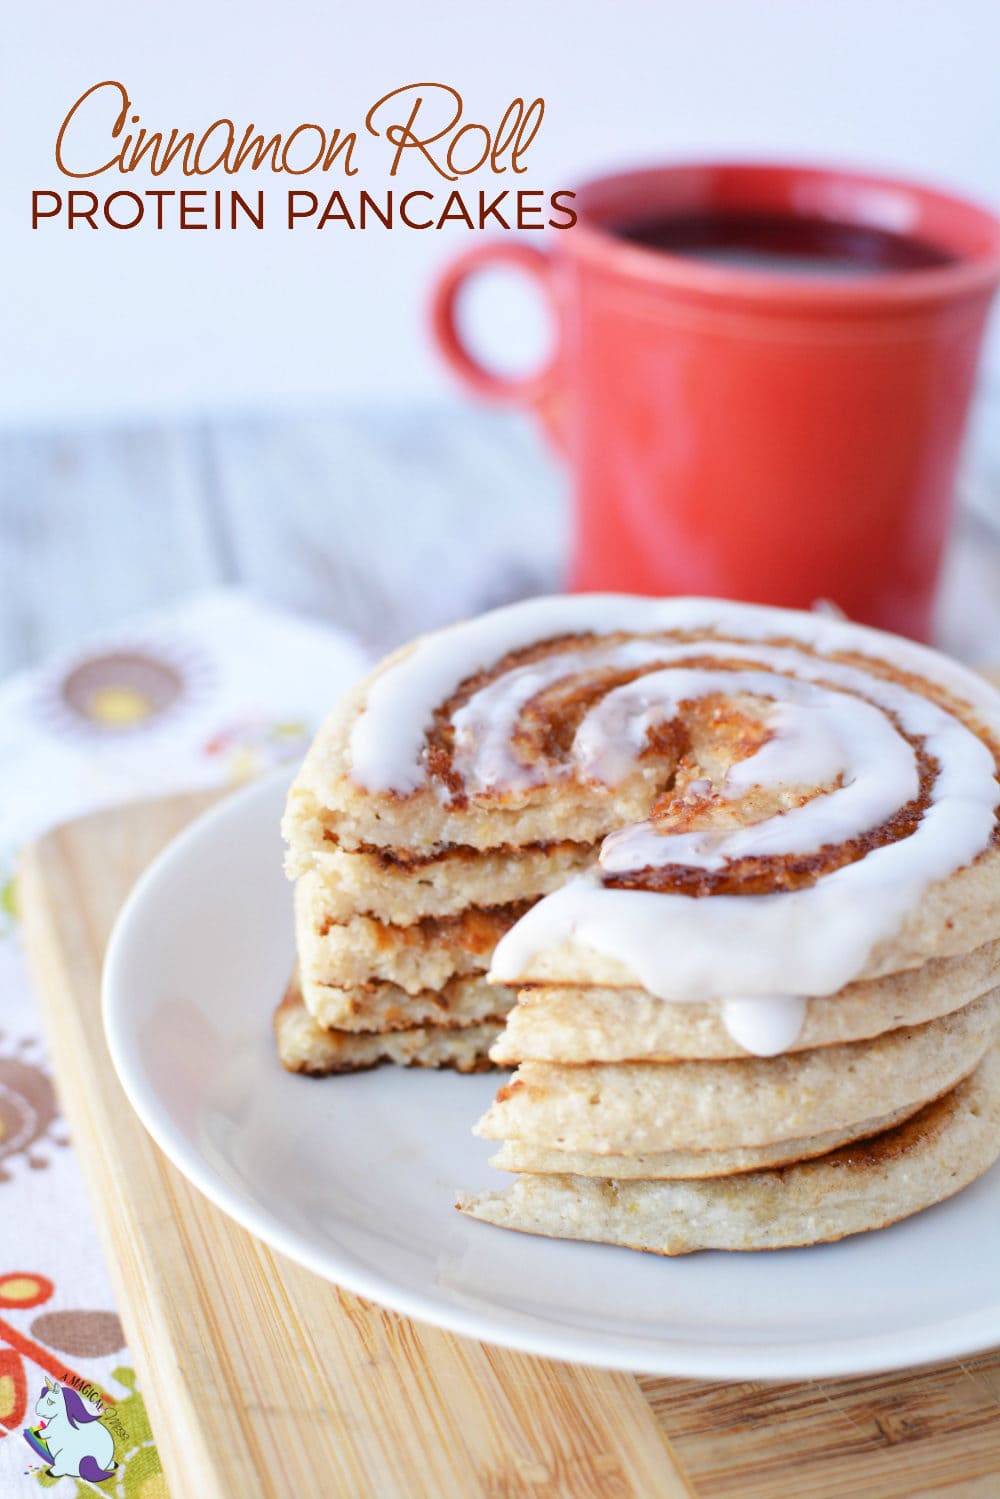 Cinnamon roll pancakes with some missing in front of a red coffee mug. 